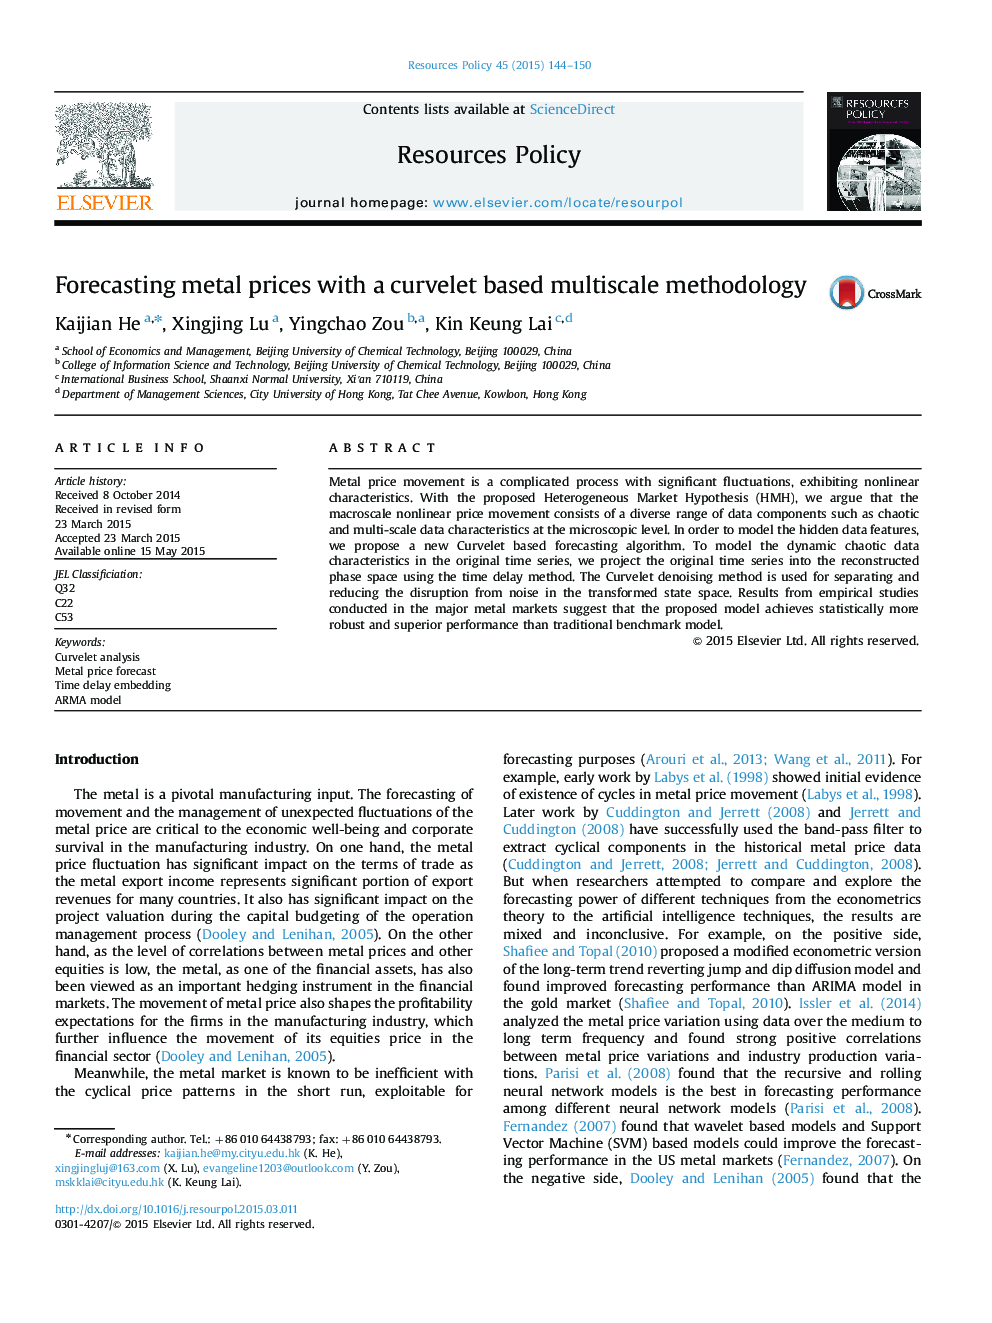 Forecasting metal prices with a curvelet based multiscale methodology